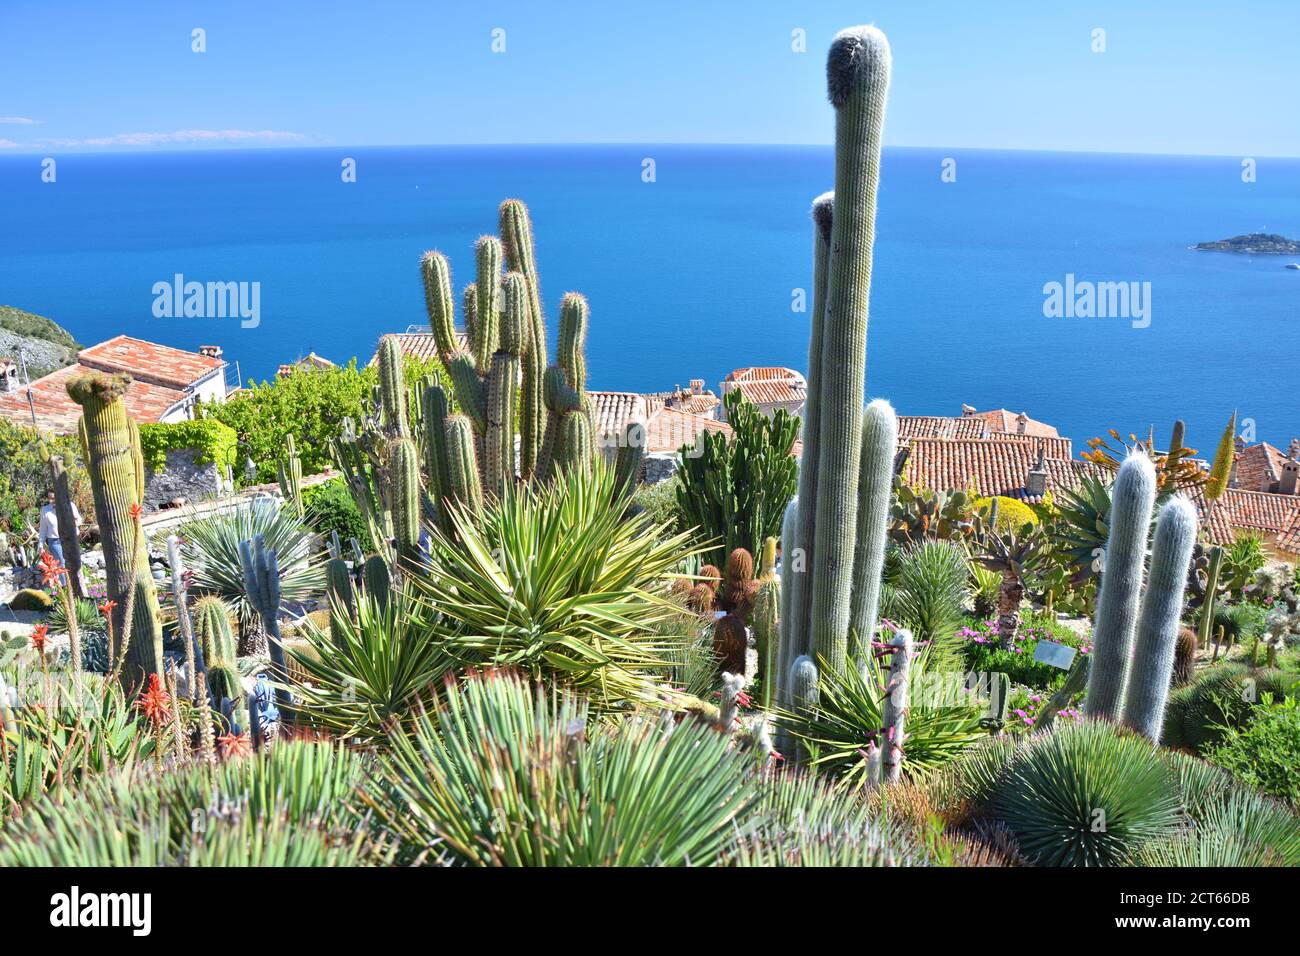 Cactus and succulent exotic garden with amazing Mediterranean Sea view in Eze, France. Stock Photo